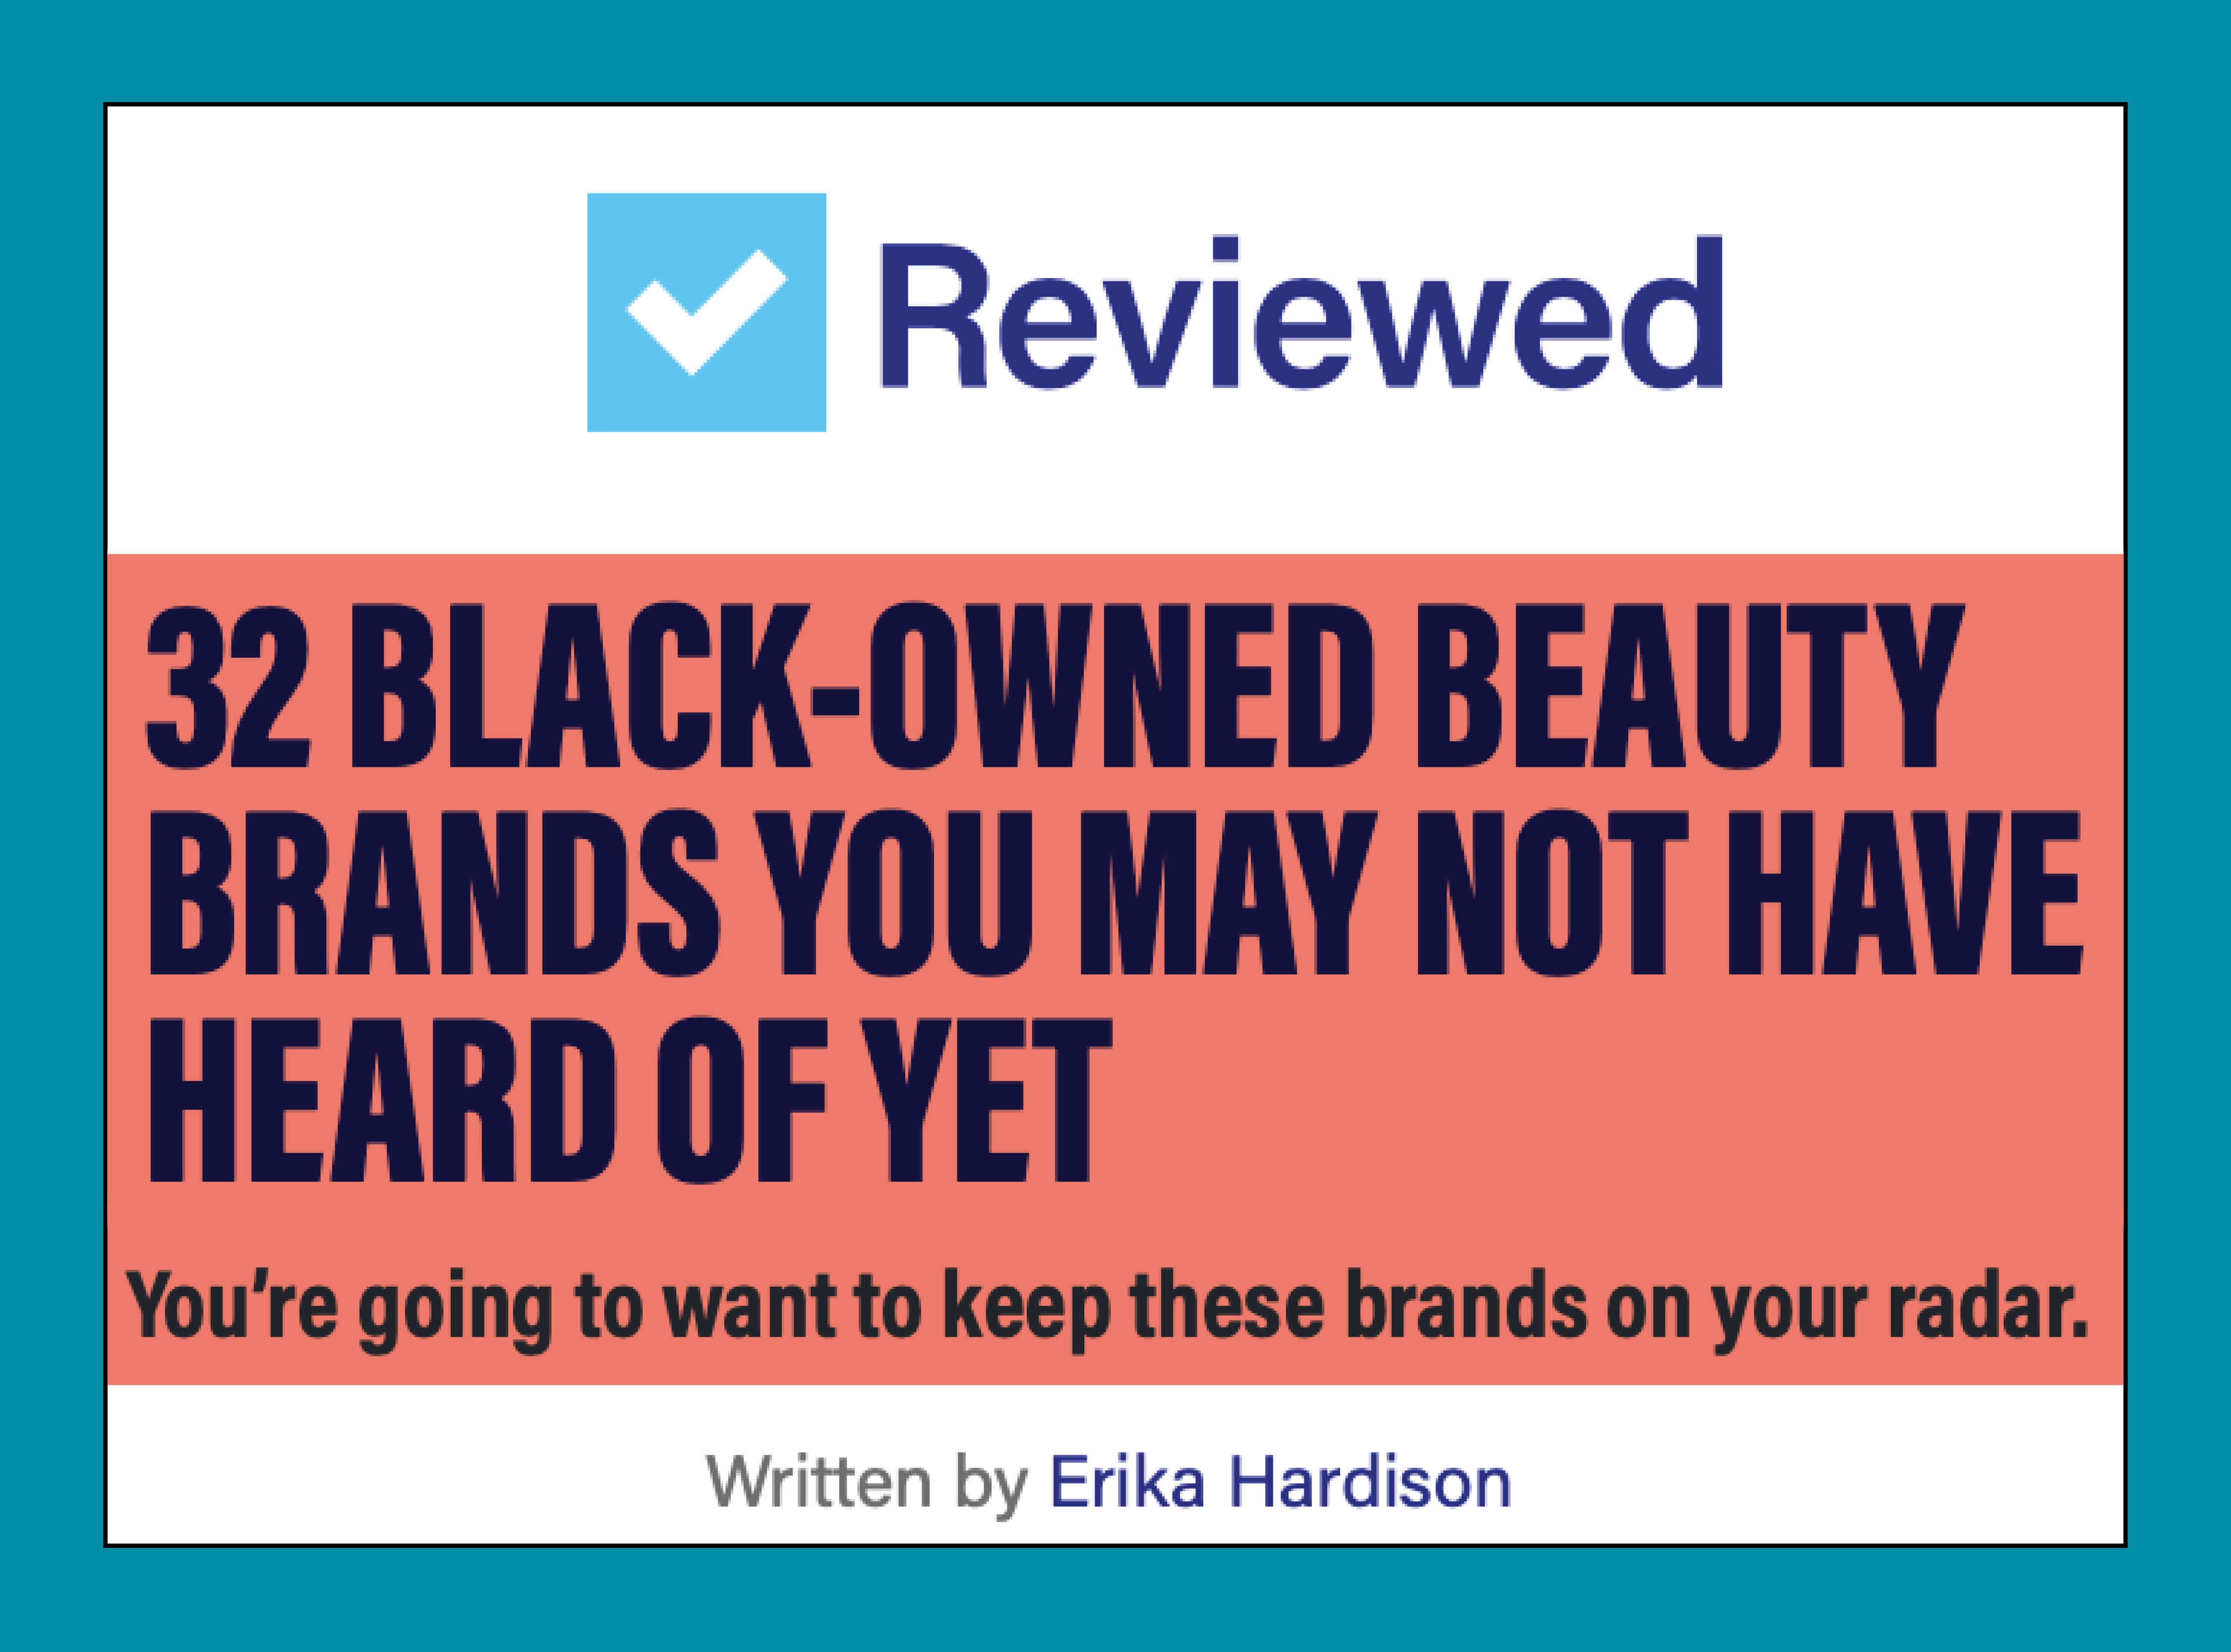 Reviewed touted Kadalys as a black owned beauty brand you should "keep on your radar."